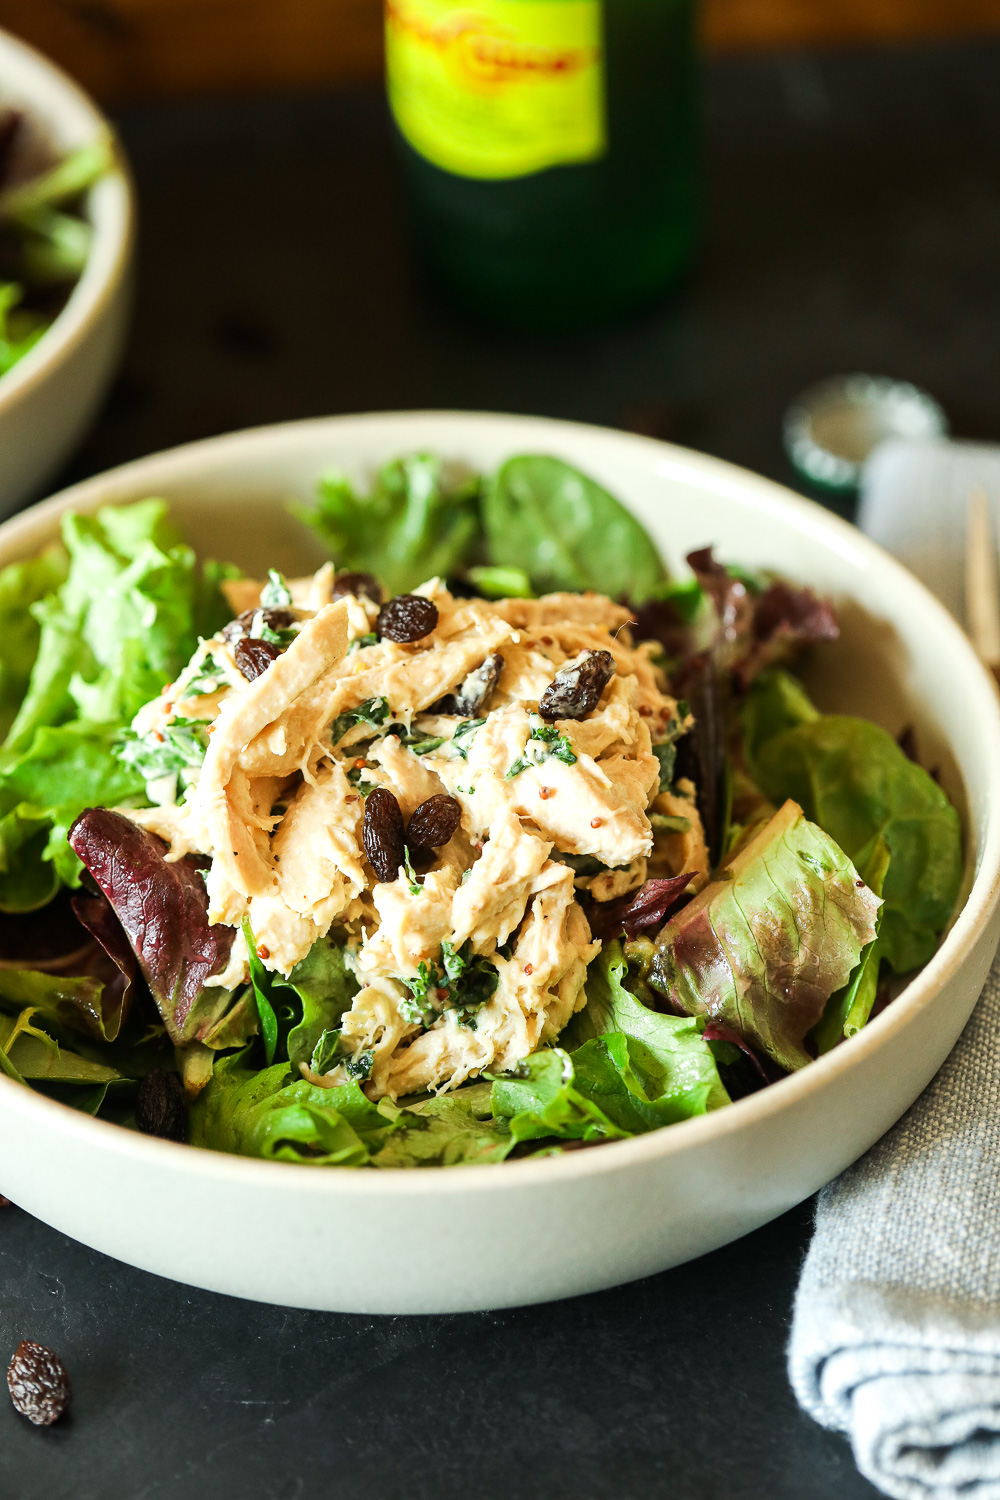 This Maple Tahini Chicken Salad is a paleo recipe that is so simple yet has amazing flavor!